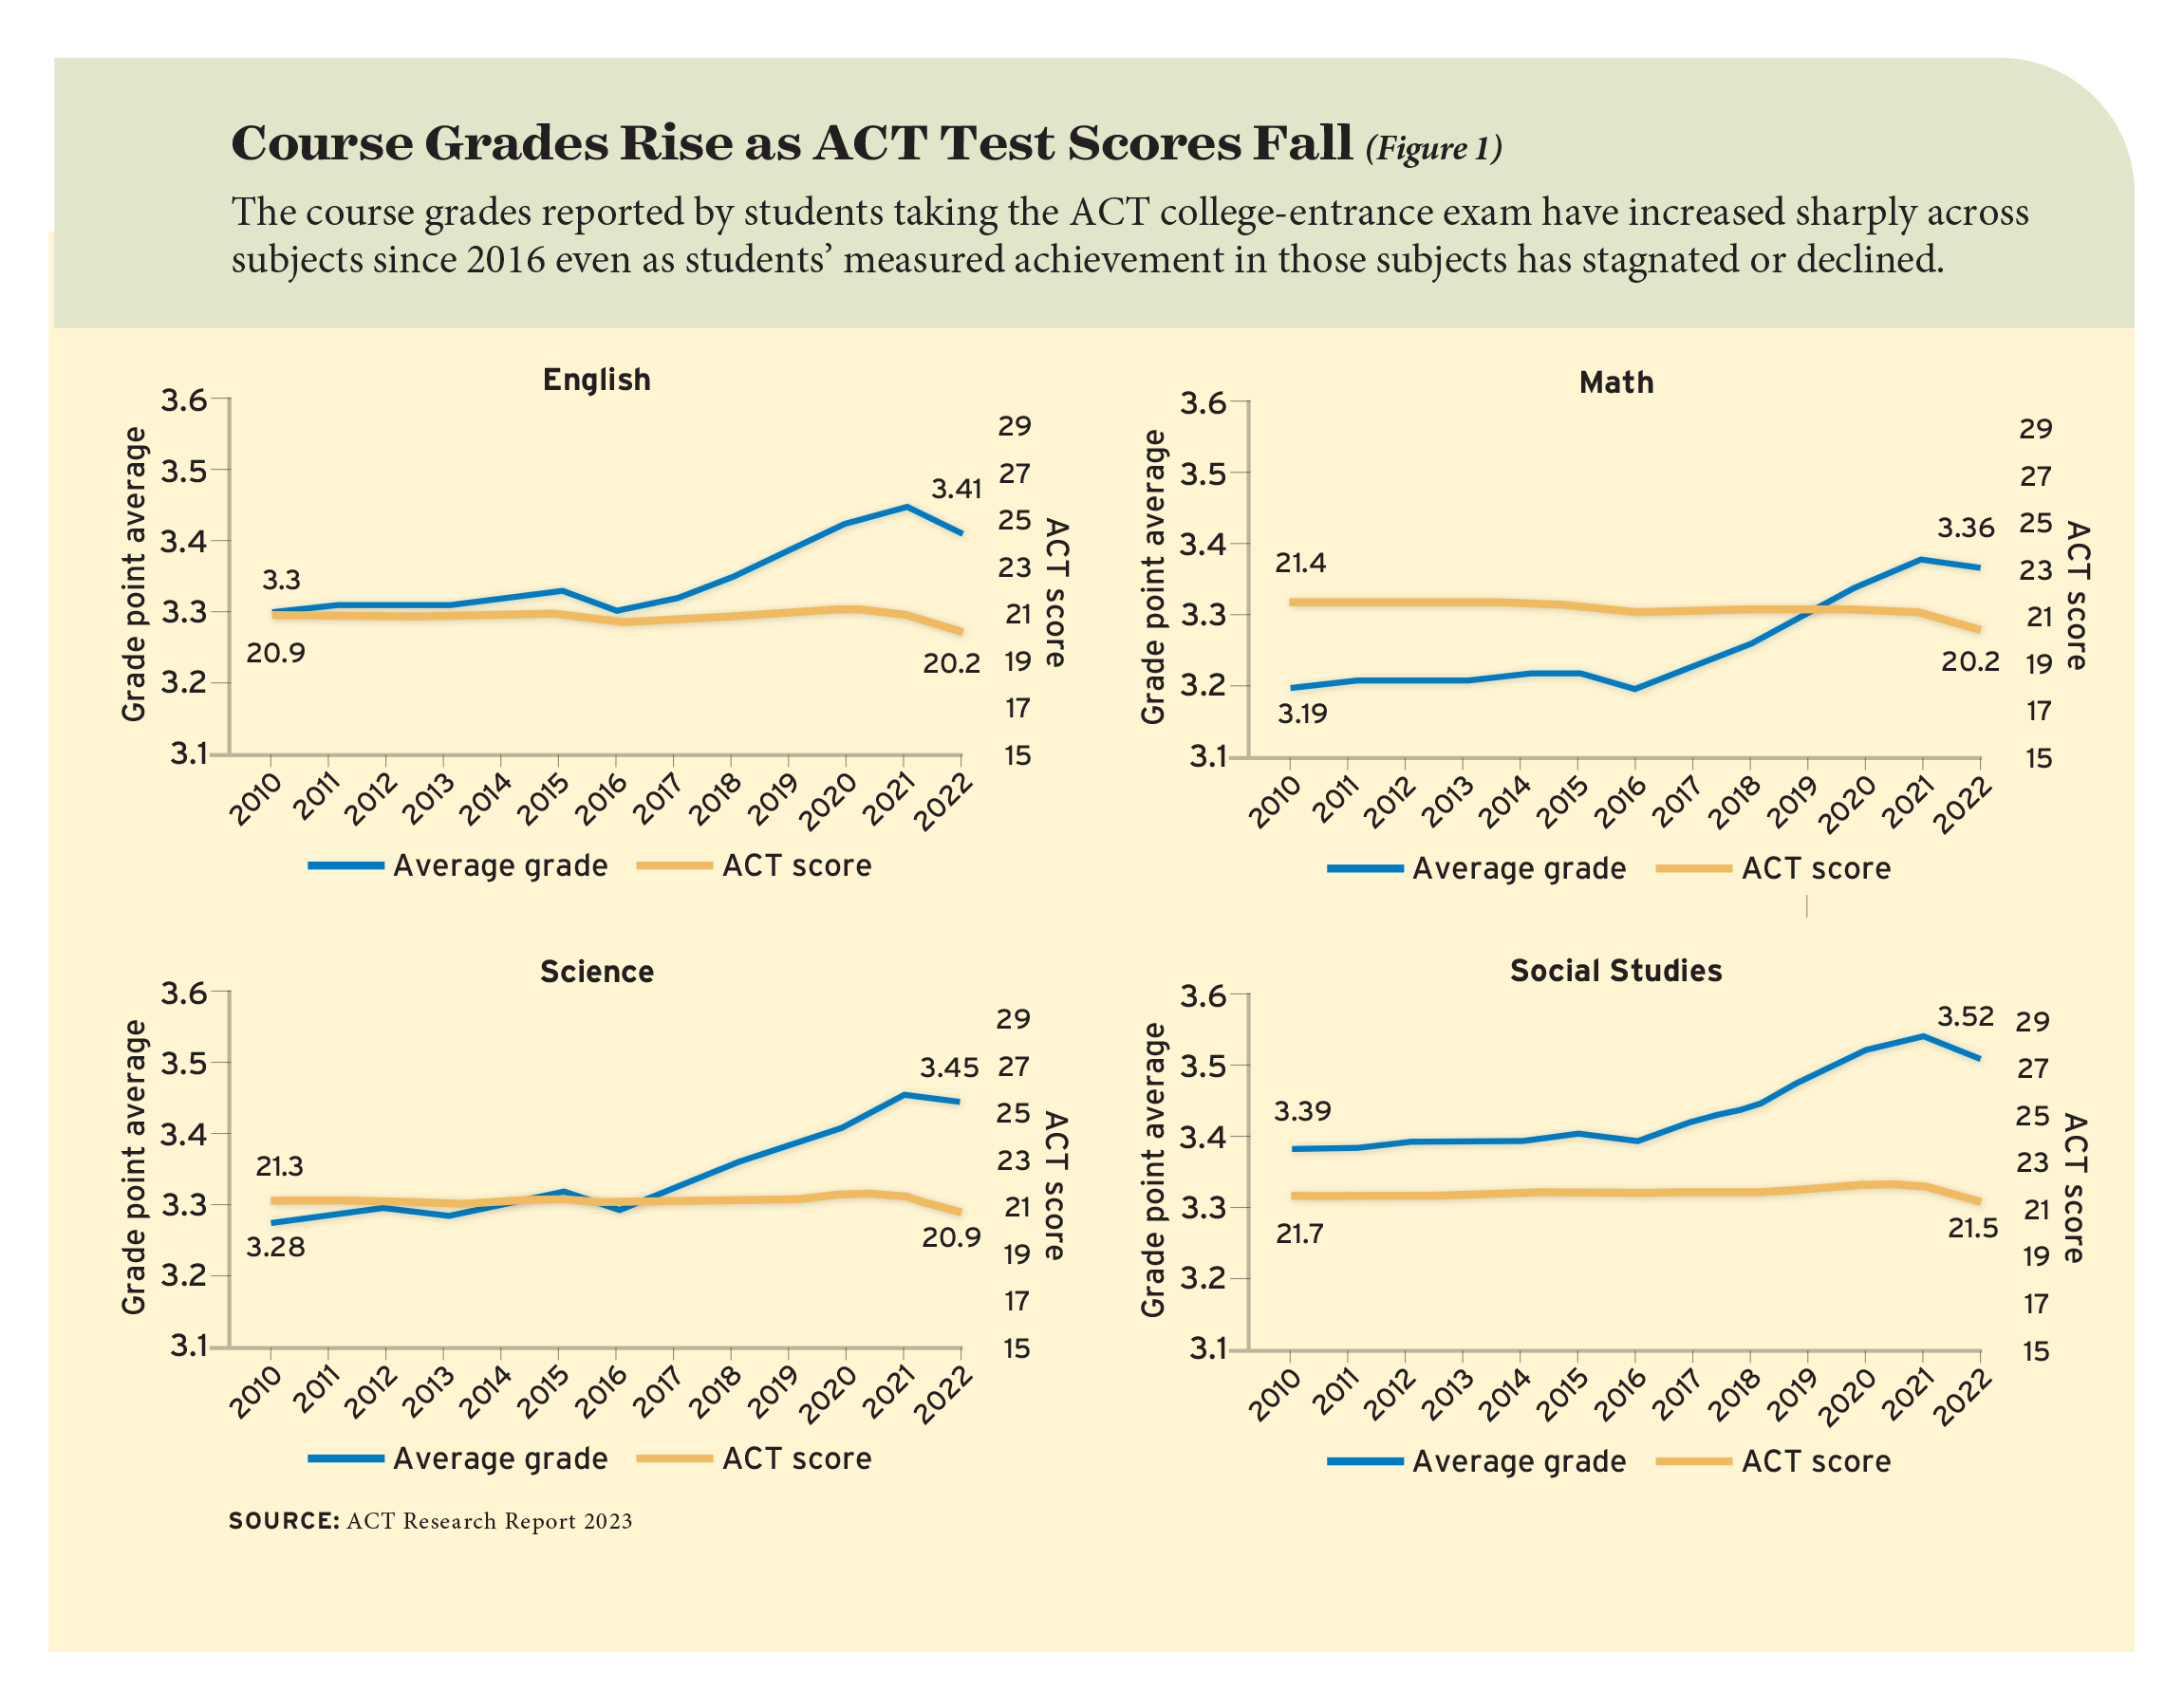 Figure 1: Course Grades Rise as ACT Test Scores Fall